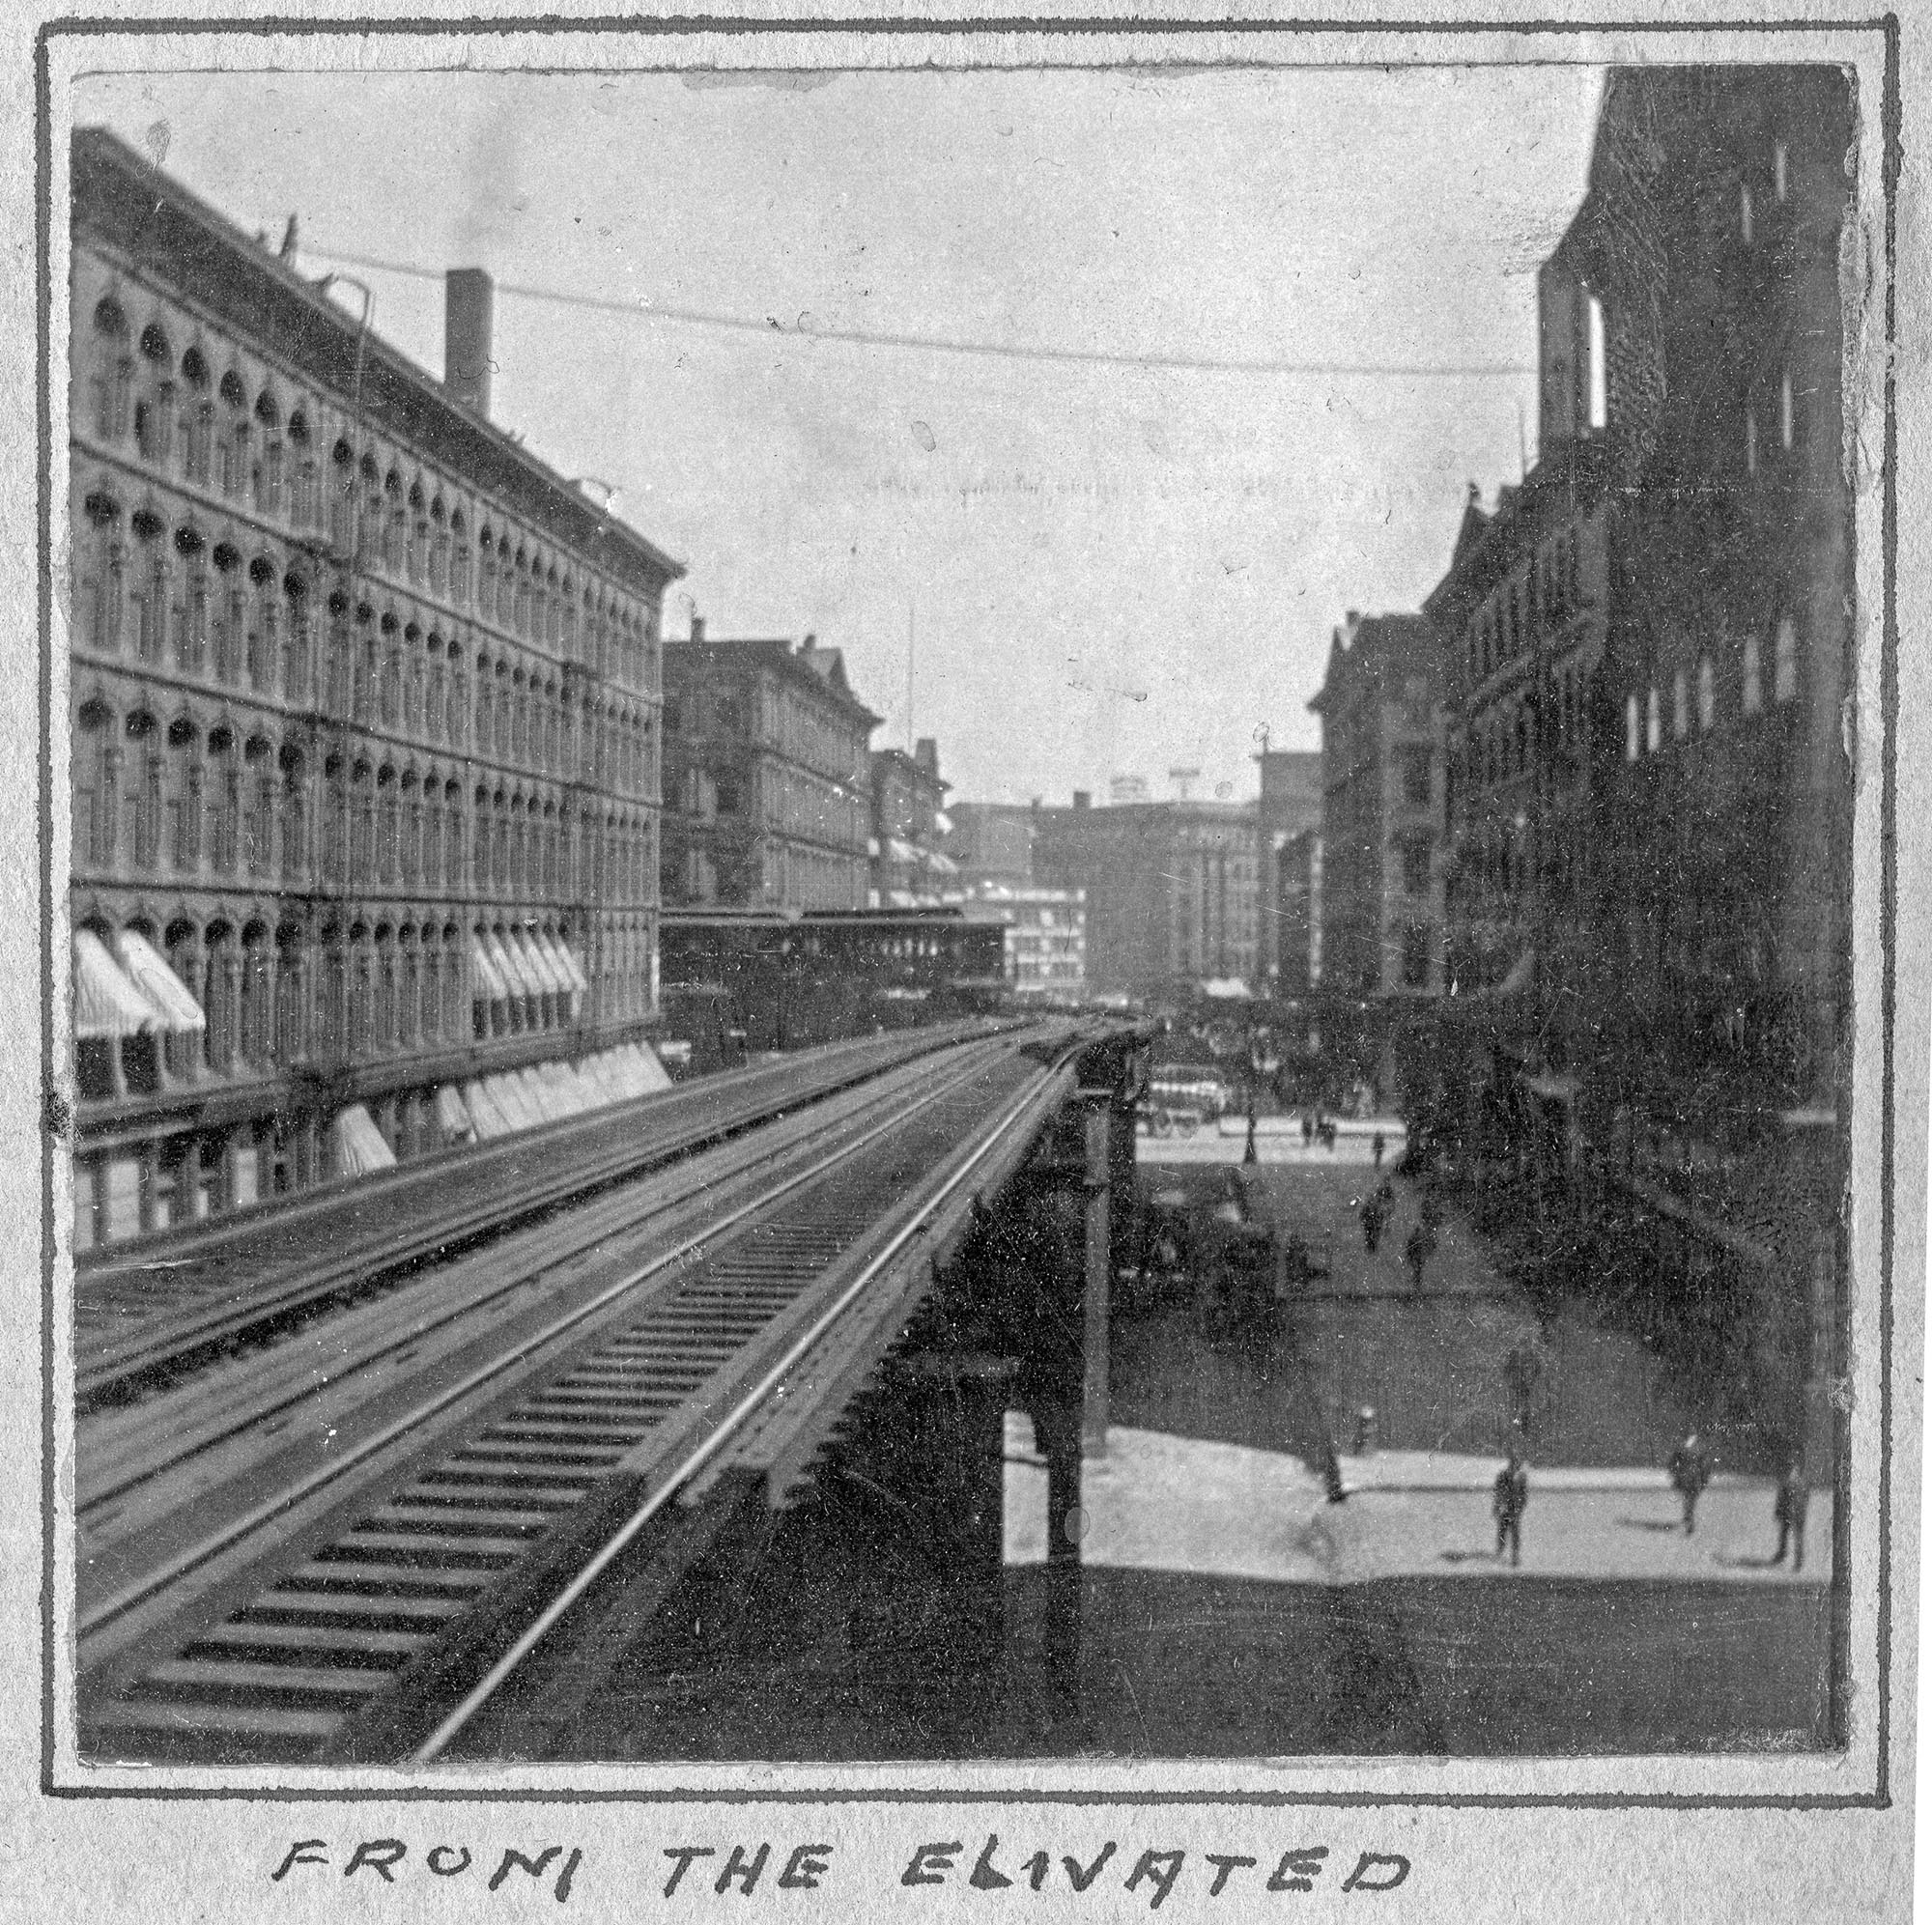 "From the Elivated [sic]", Chicago, 1900. From "Sam Hyde's Photography Travelogue Adventures," 1898-1904.

In early Chicago city planning, subways were too expensive to consider and elevated tracks appeared to be the right choice. On June 6, 1892, the first elevated line in Chicago opened, running from Congress Parkway and State Street to 39th Street, along the alley, behind and around buildings, its route was completely through city-owned alleys. Earning it the nickname "Alley 'L'." This was done to circumvent the difficulty of obtaining consent signatures from the property owners along the streets, something required by the Cities and Villages Act of 1872.

Photo taken by Samuel Peake Hyde, b. Feb 17, 1850, St. Francisville, Clark, Missouri; d. April 28, 1921, Belleville, St. Clair, Illinois., son of Edwin C. Hyde and Elizabeth Hyde. Samuel was a clerk for J. G. Green Company, 1867, and then worked with his father at E.C. Hyde & Co., Storage and Commission, 4 South Commercial Street, Belleville, IL. Sam resided at 37 North Douglas, Belleville, Illinois.